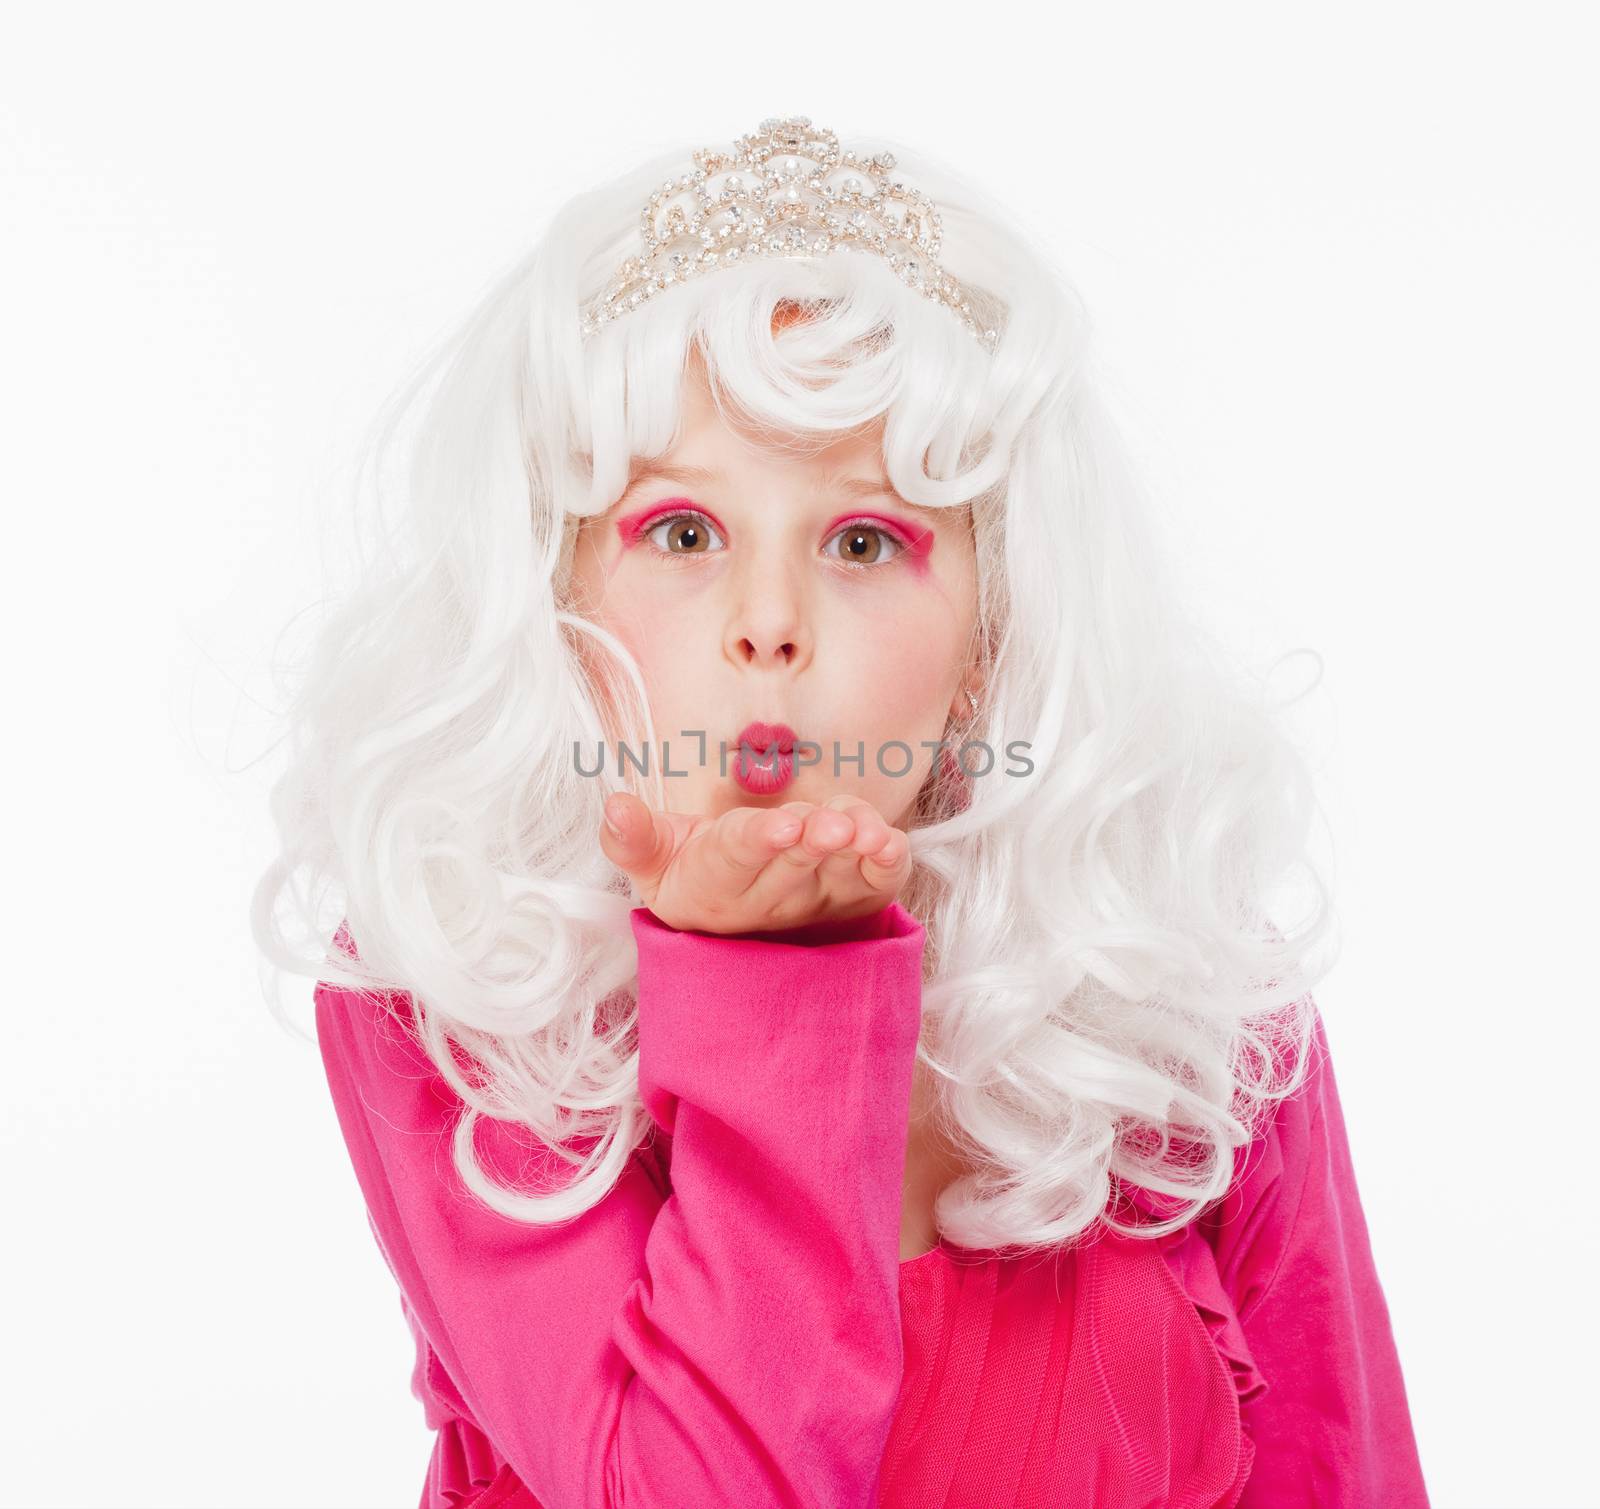 Girl in White Wig and Diadem Posing as Princess by courtyardpix